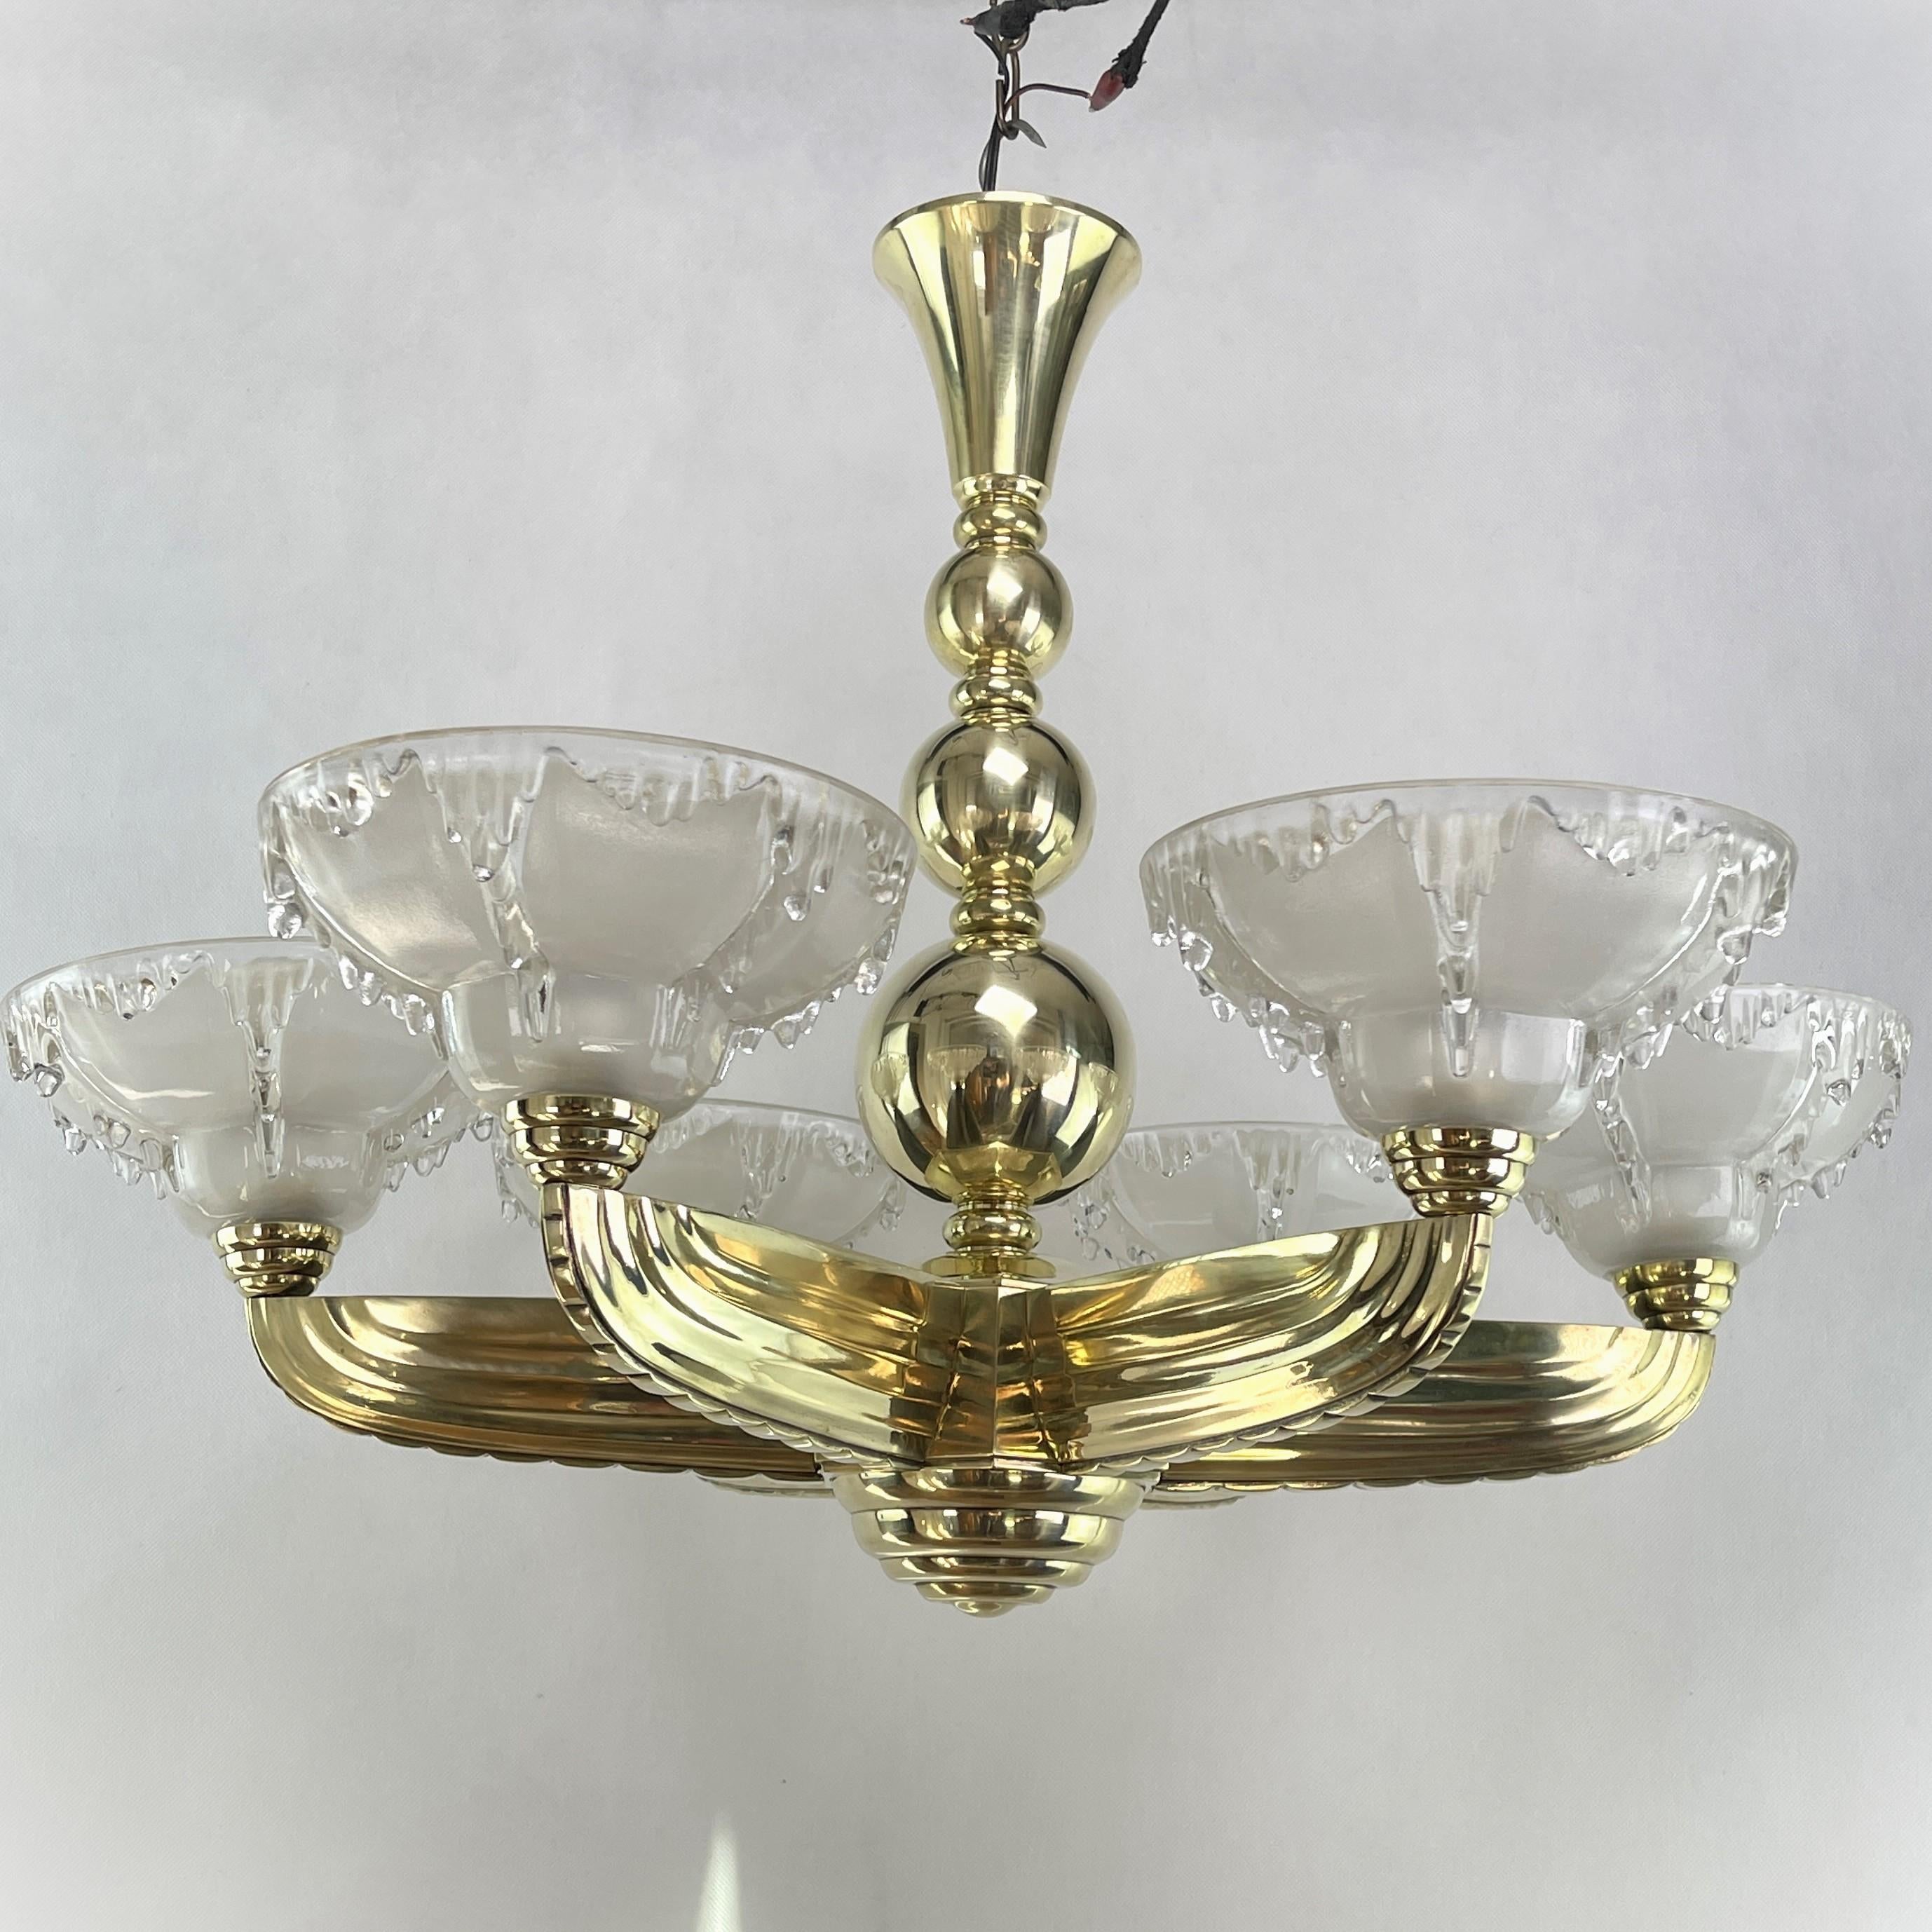 French Art Deco Ceiling Lamp from Petitot & Ezan, 1930s For Sale